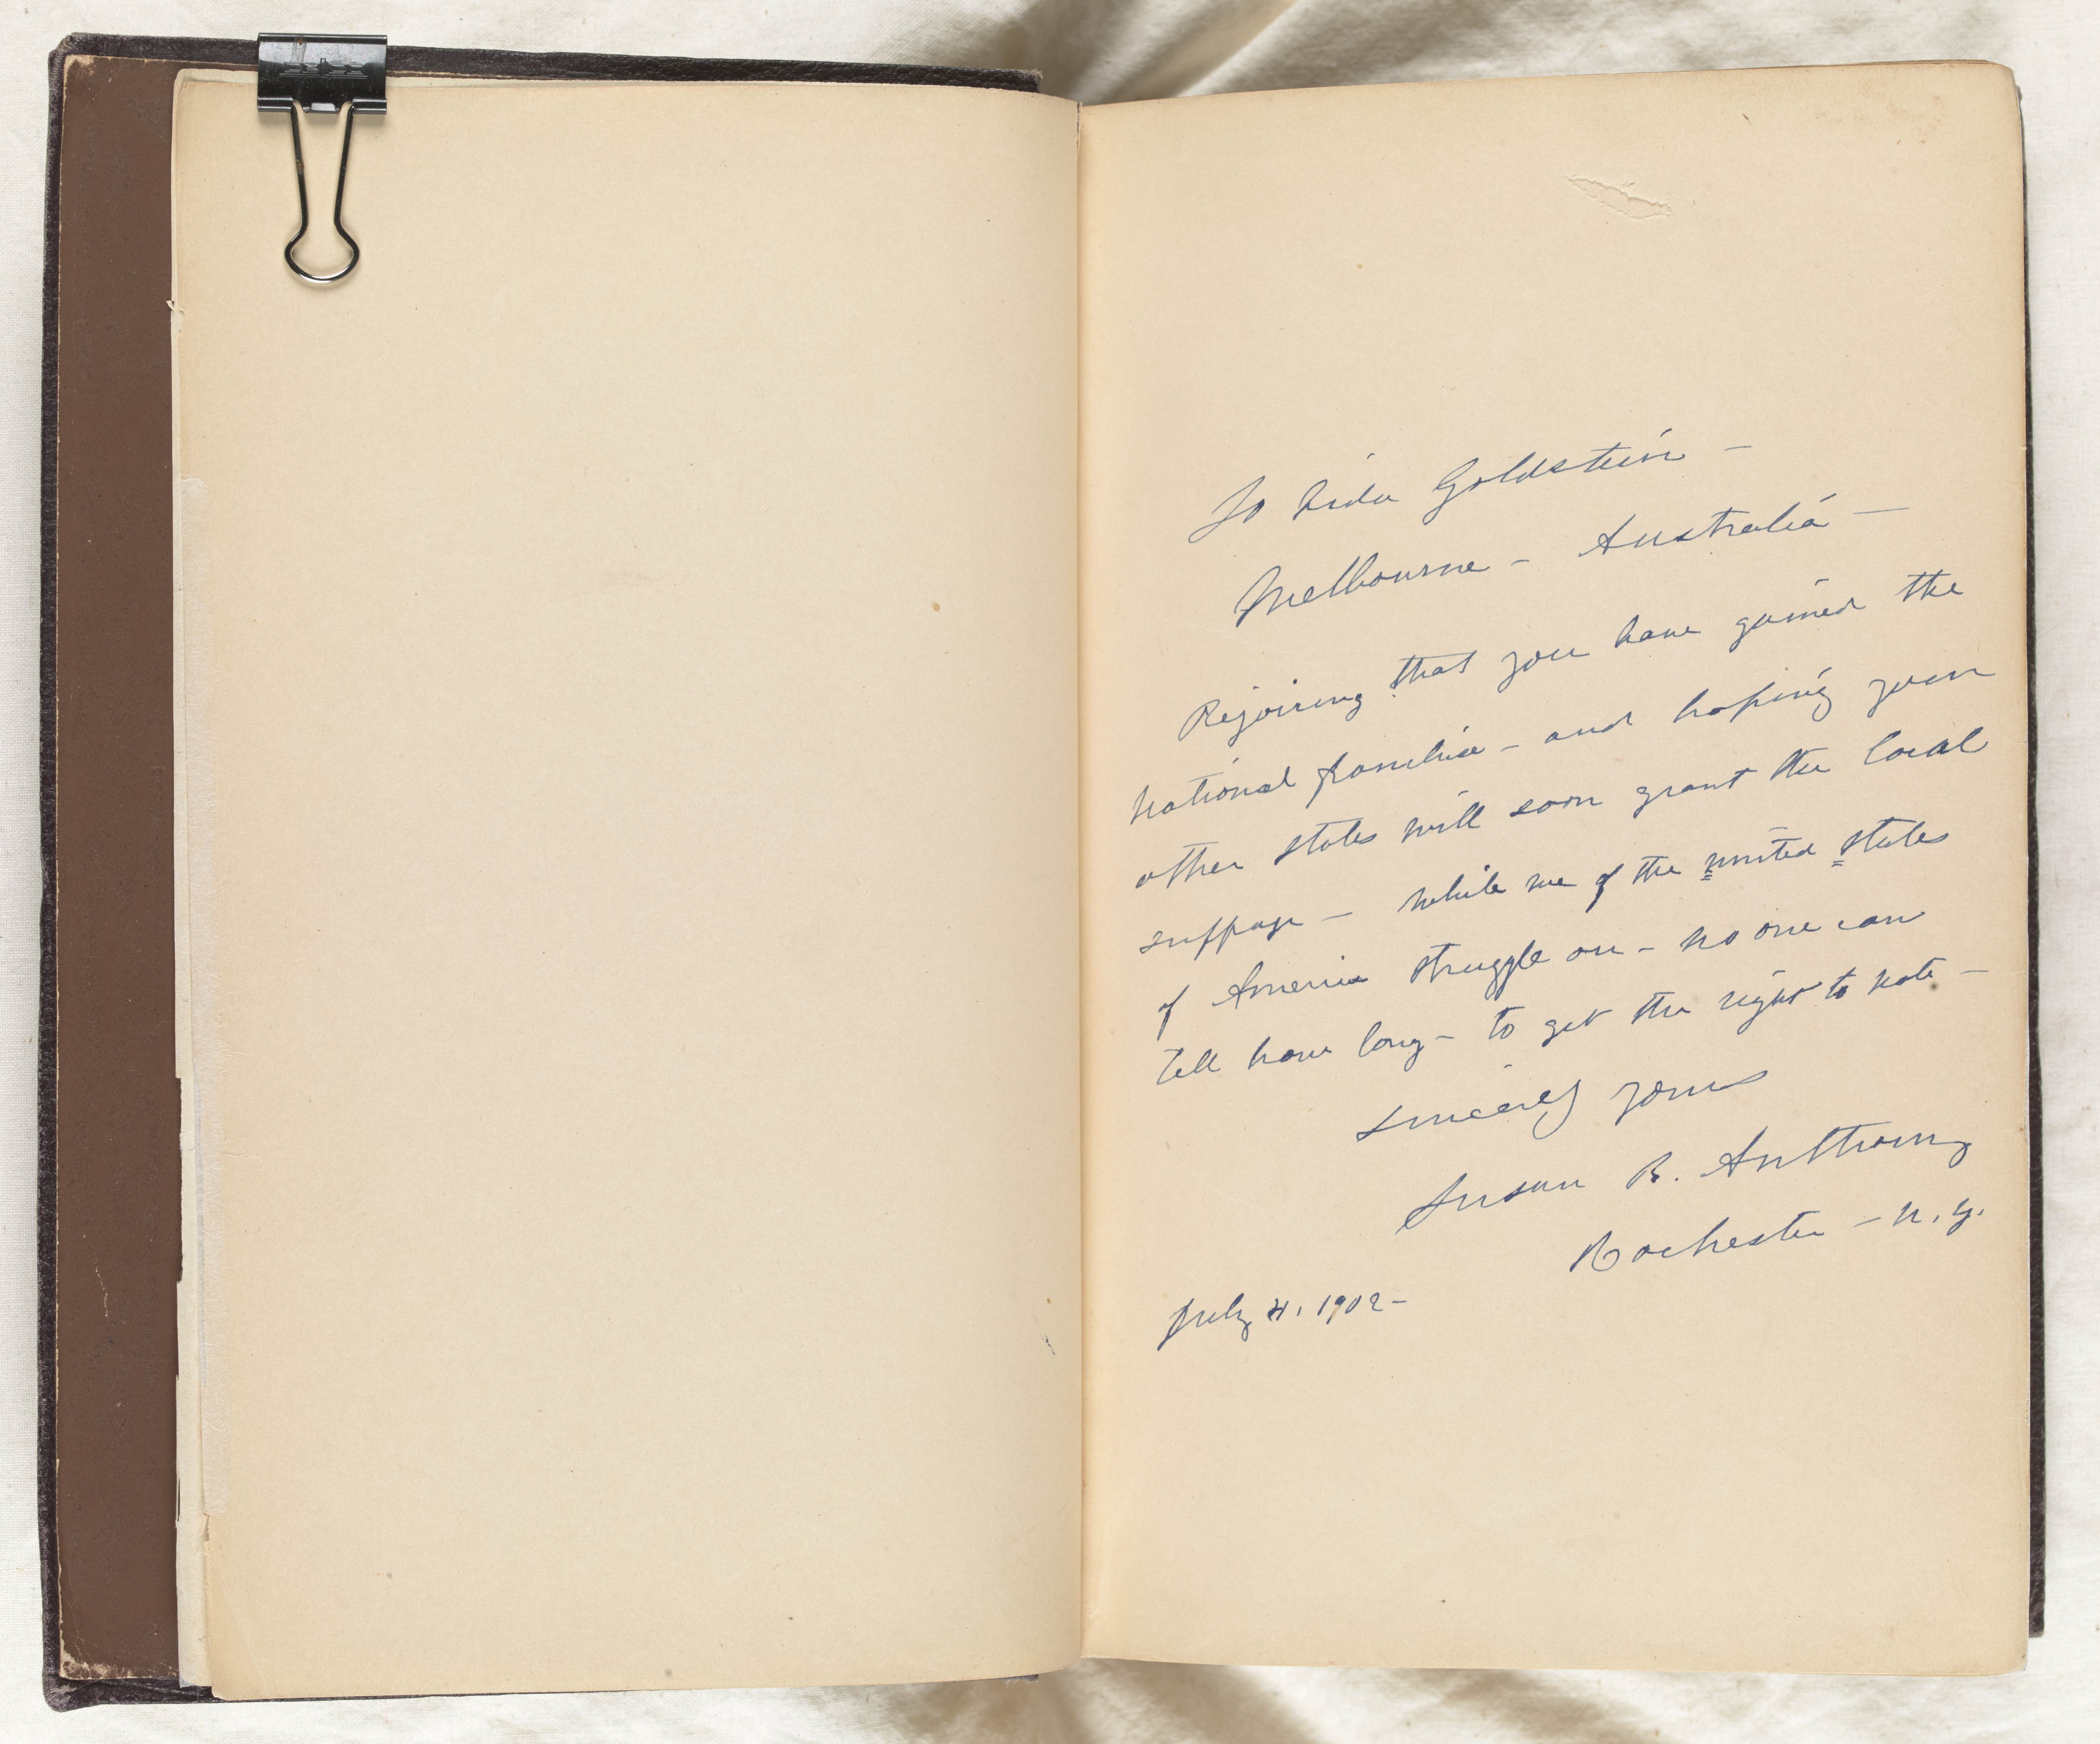 An inscription on the flyleaf of volume 3 of 'The history of Woman Suffrage', edited by Susan B. Anthony and Ida Husted Harper, 1896. The inscription is in Anthony's hand. 